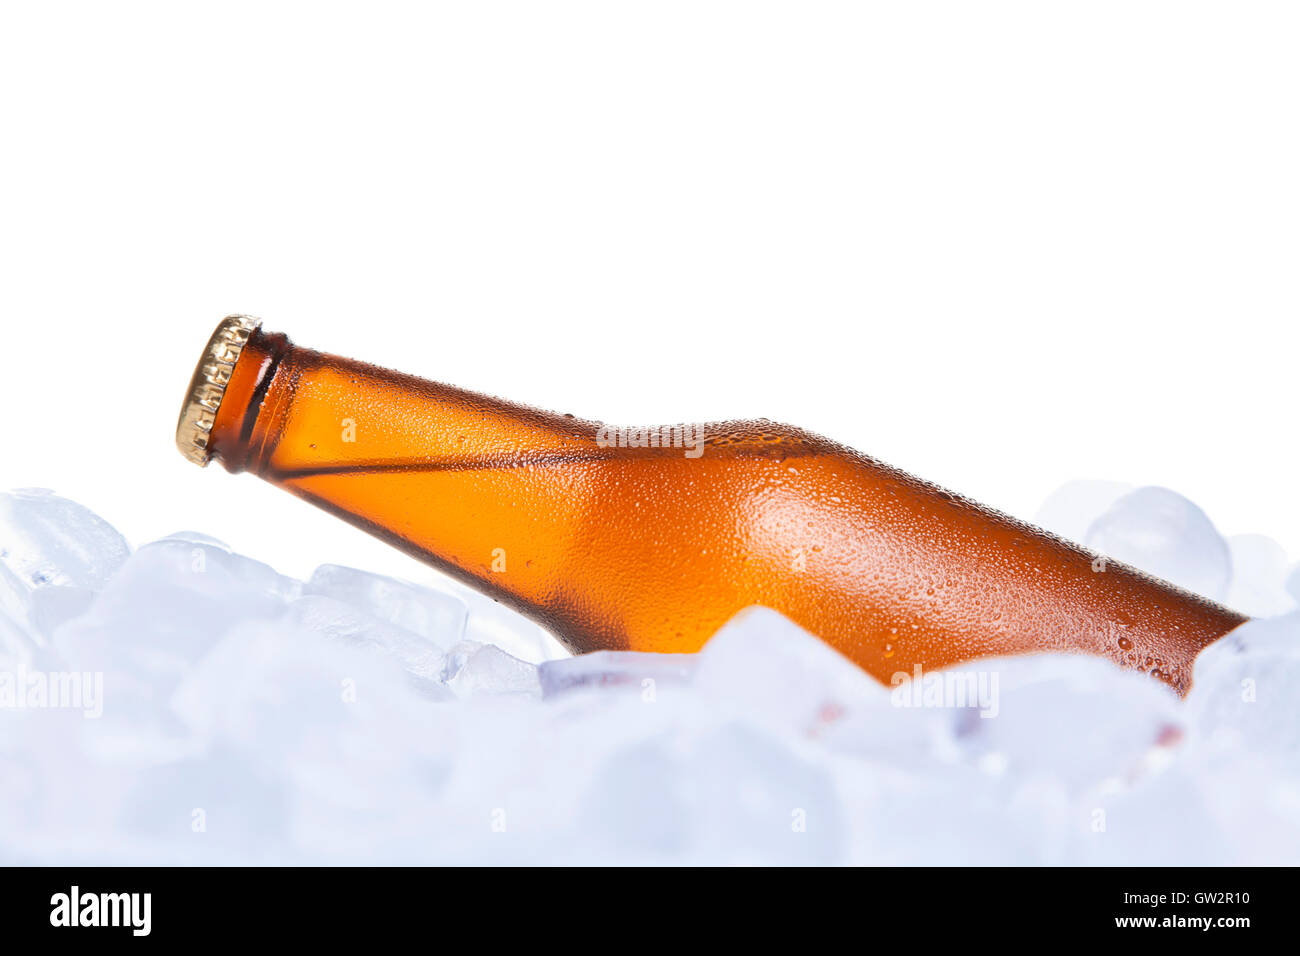 1,900+ Beer Cooler Stock Photos, Pictures & Royalty-Free Images